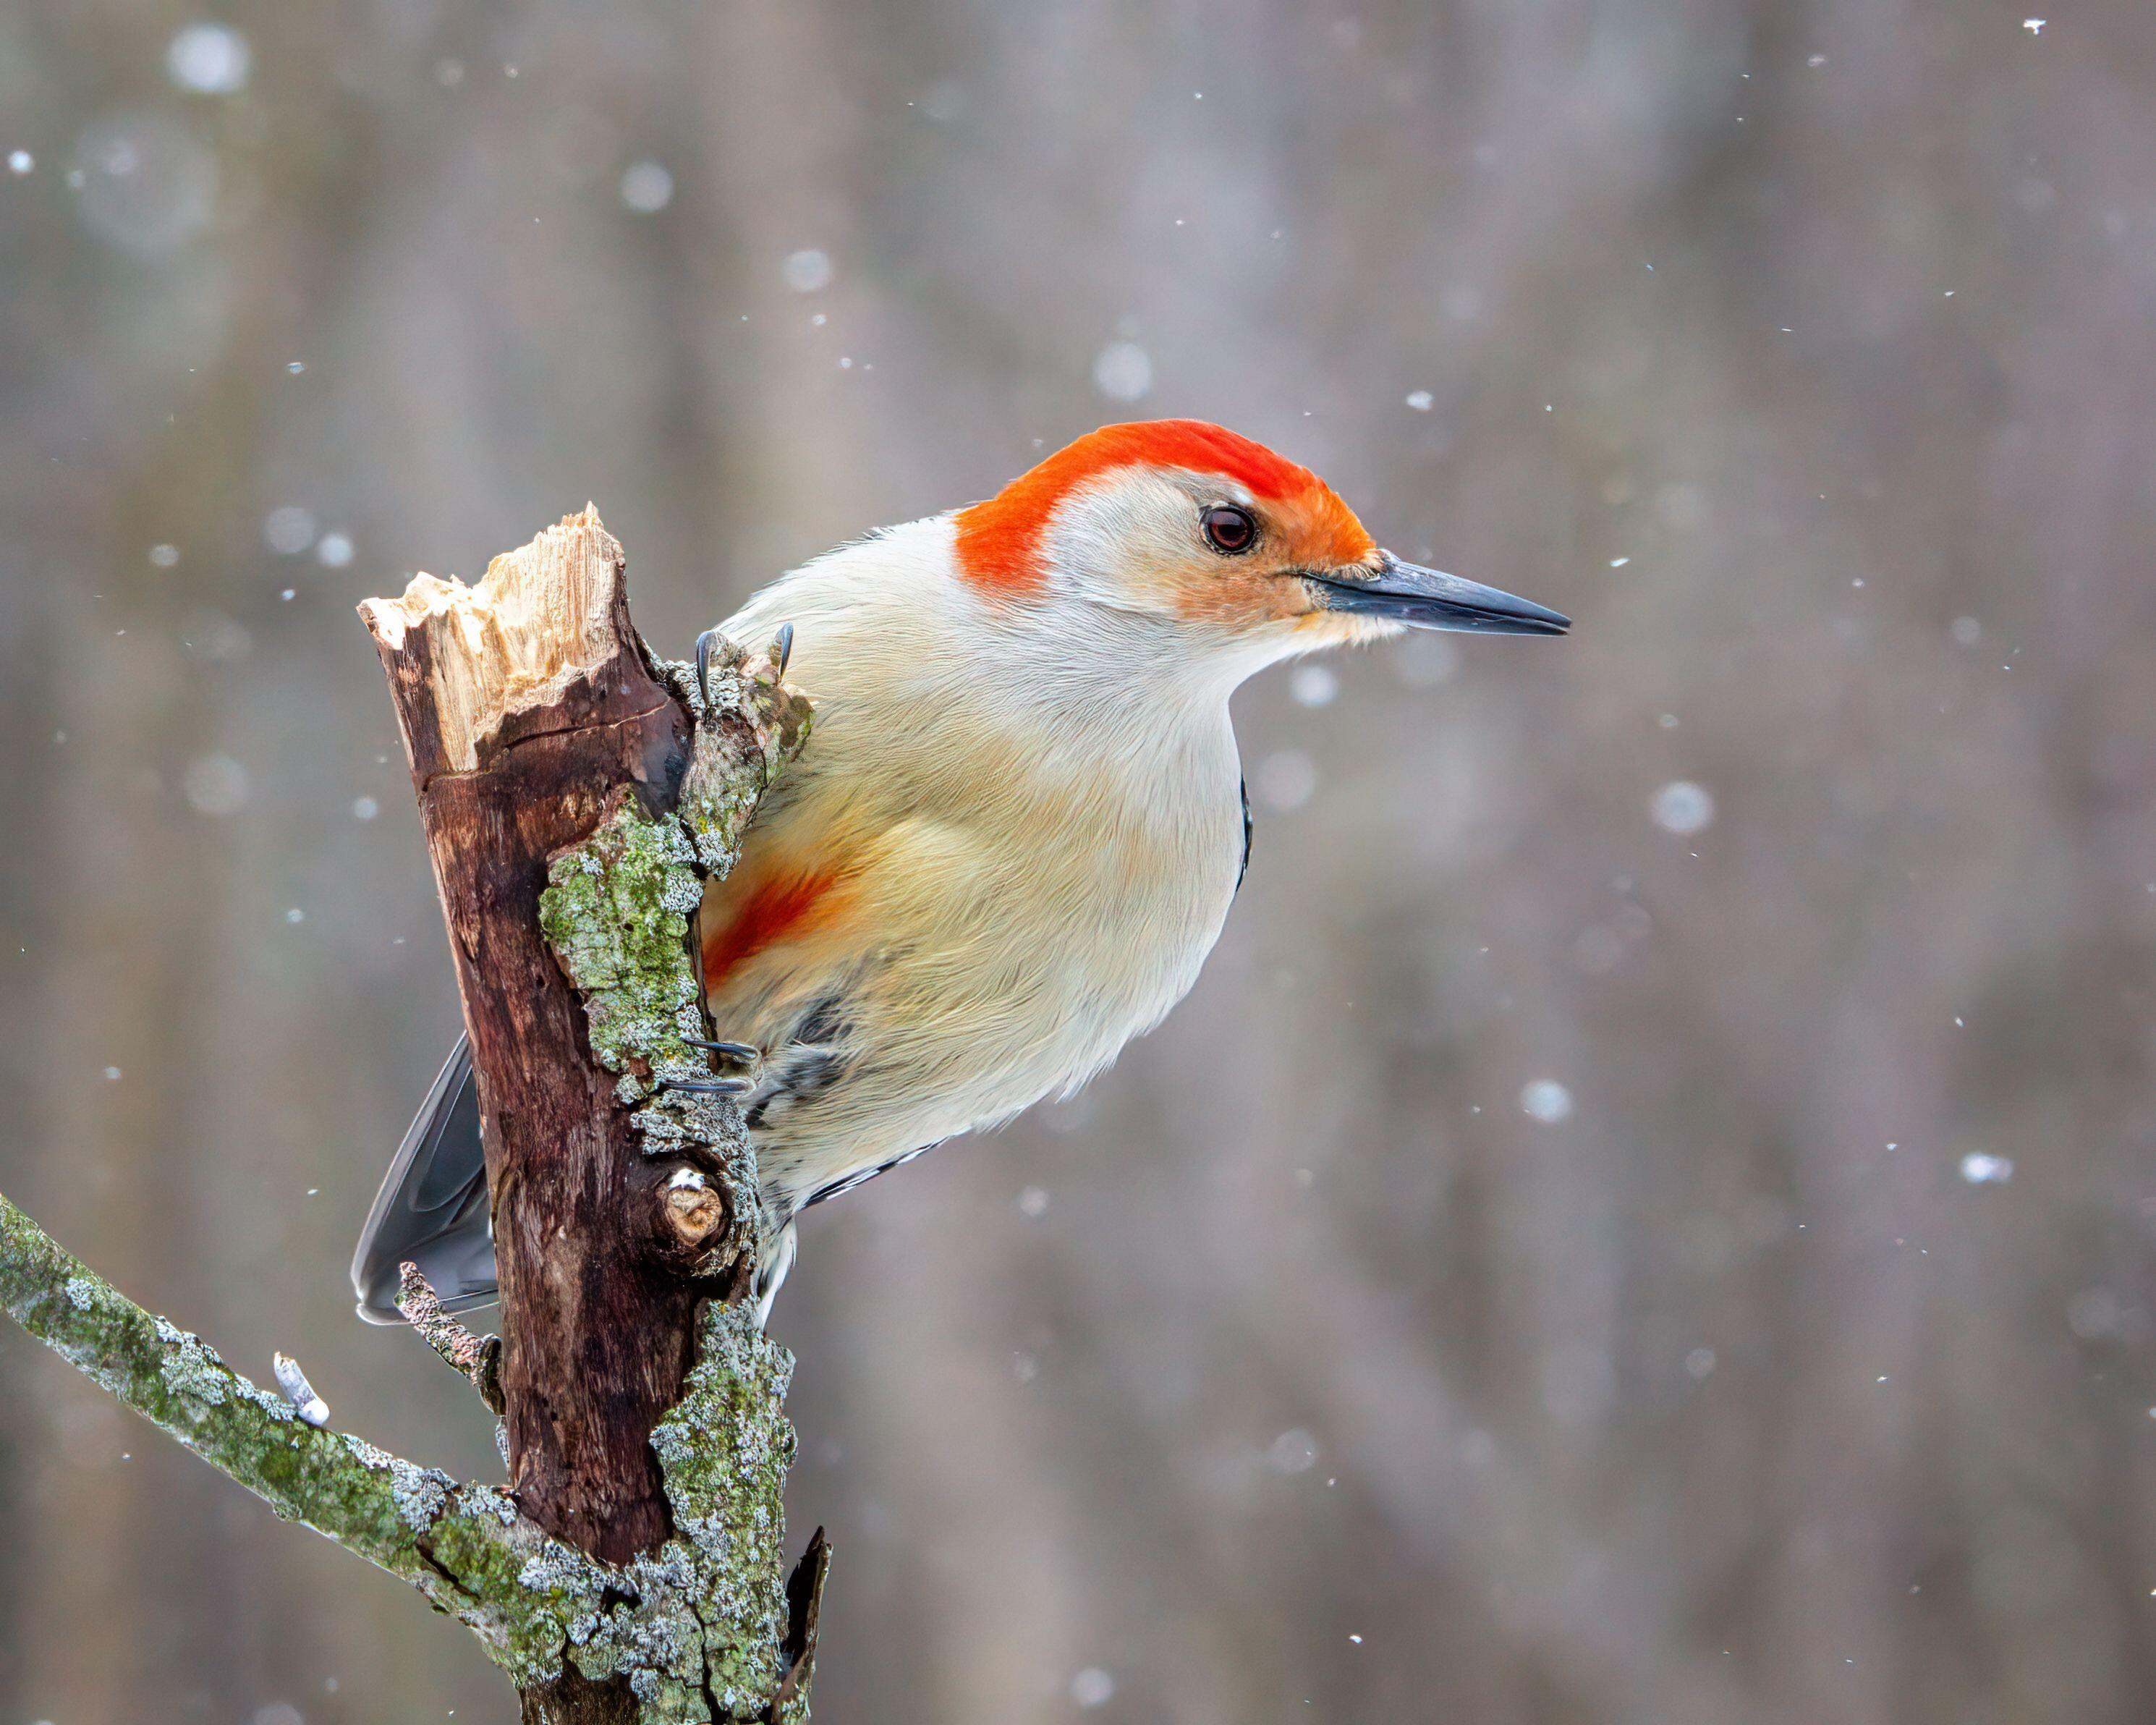 A red-bellied woodpecker perched as snow falls.